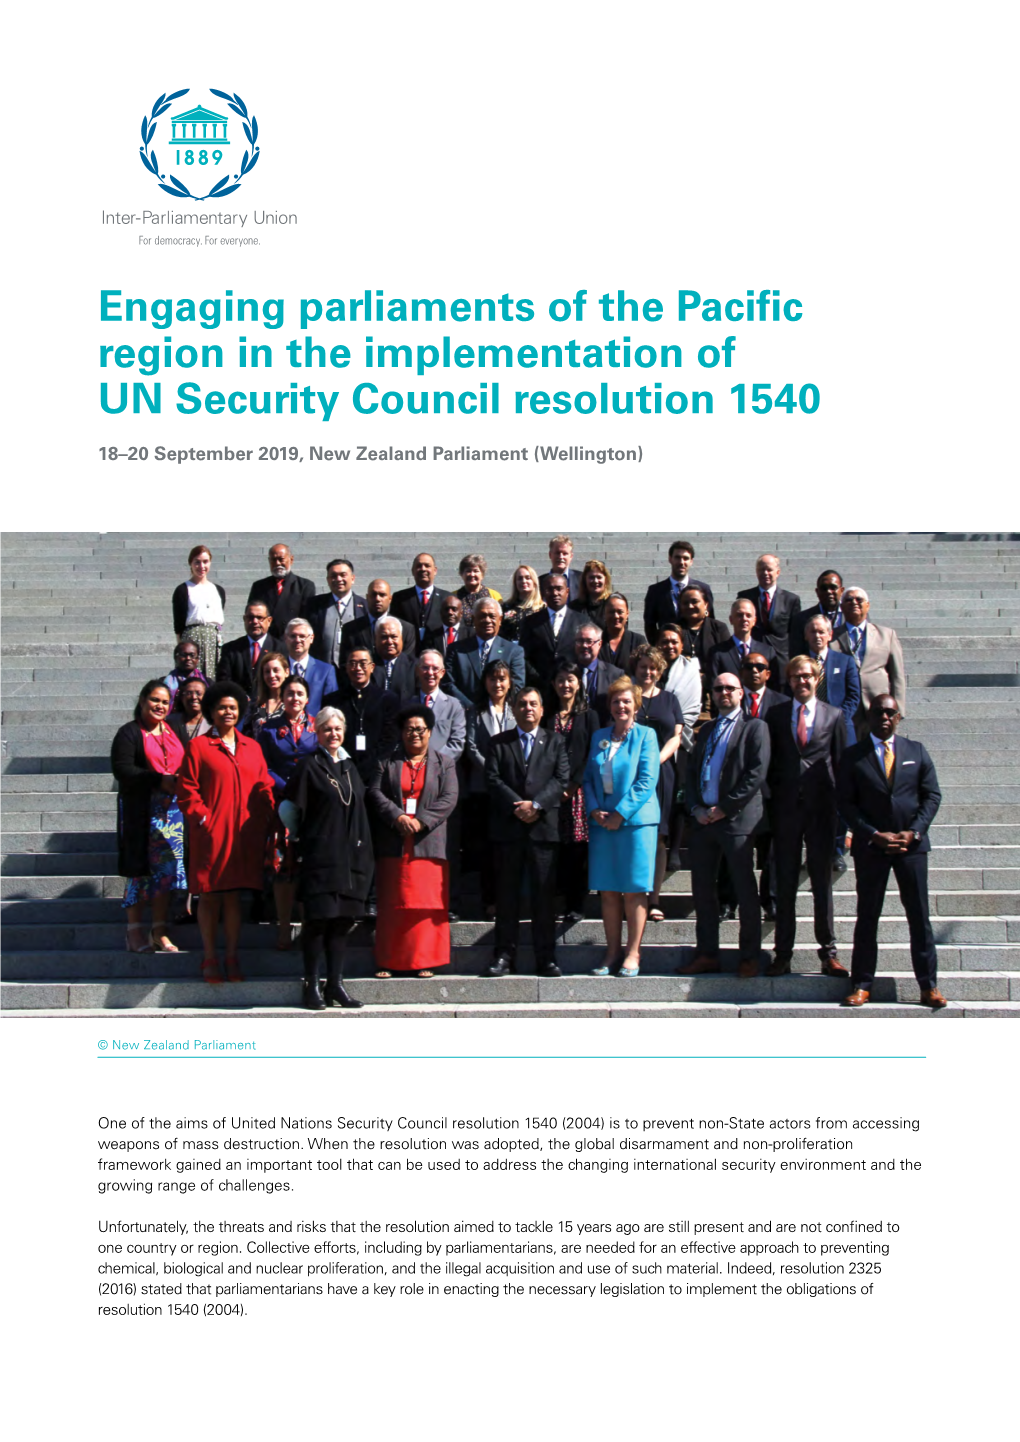 Engaging Parliaments of the Pacific Region in the Implementation of UN Security Council Resolution 1540